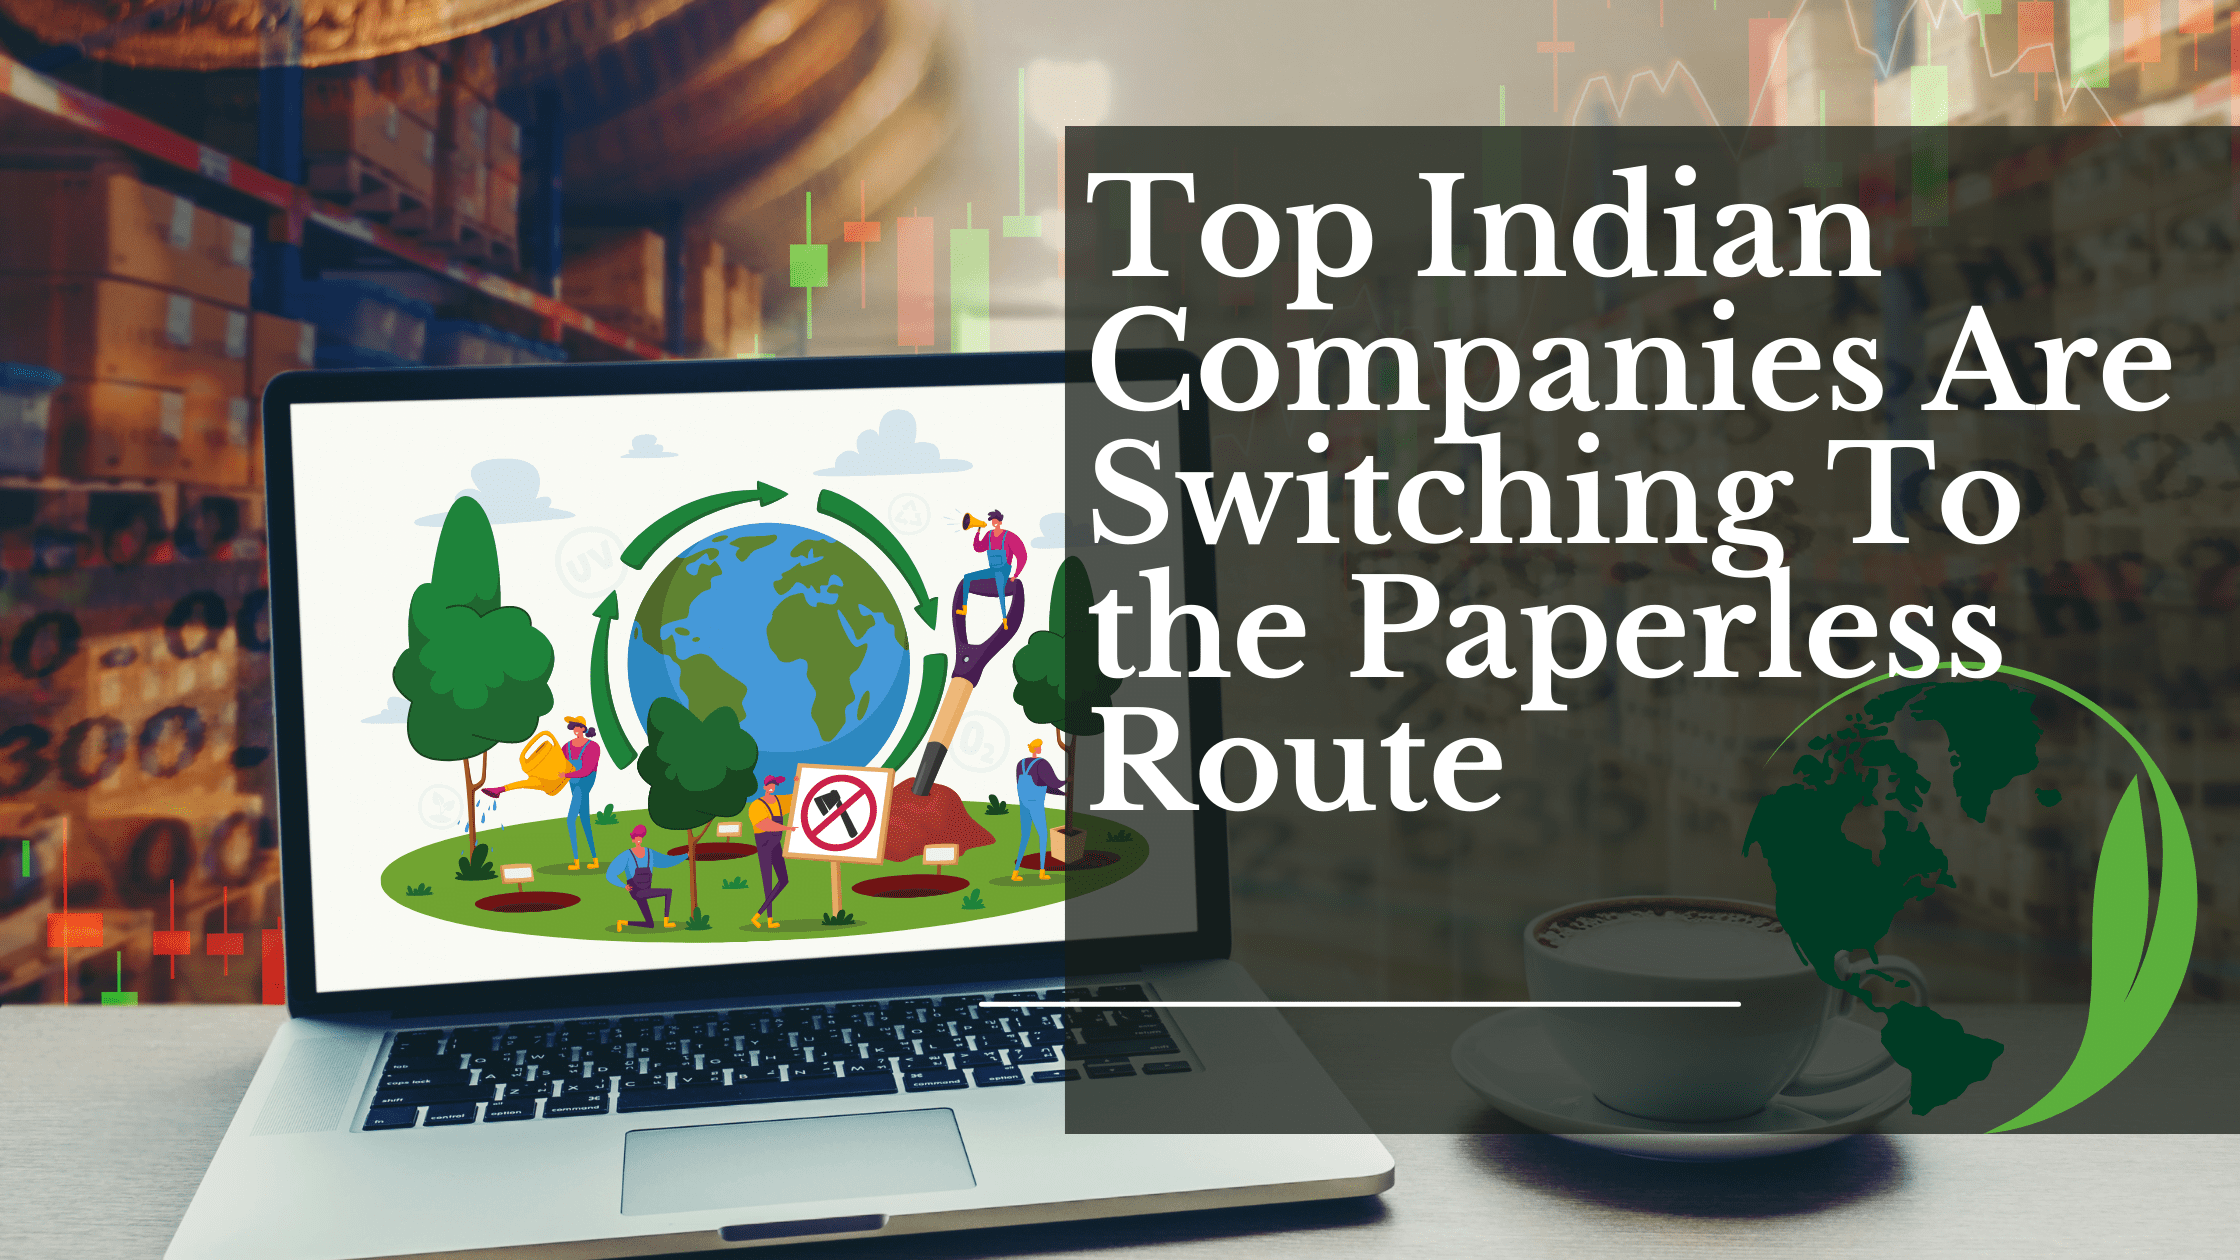 Here’s Why Top Indian Companies Are Switching To the Paperless Route